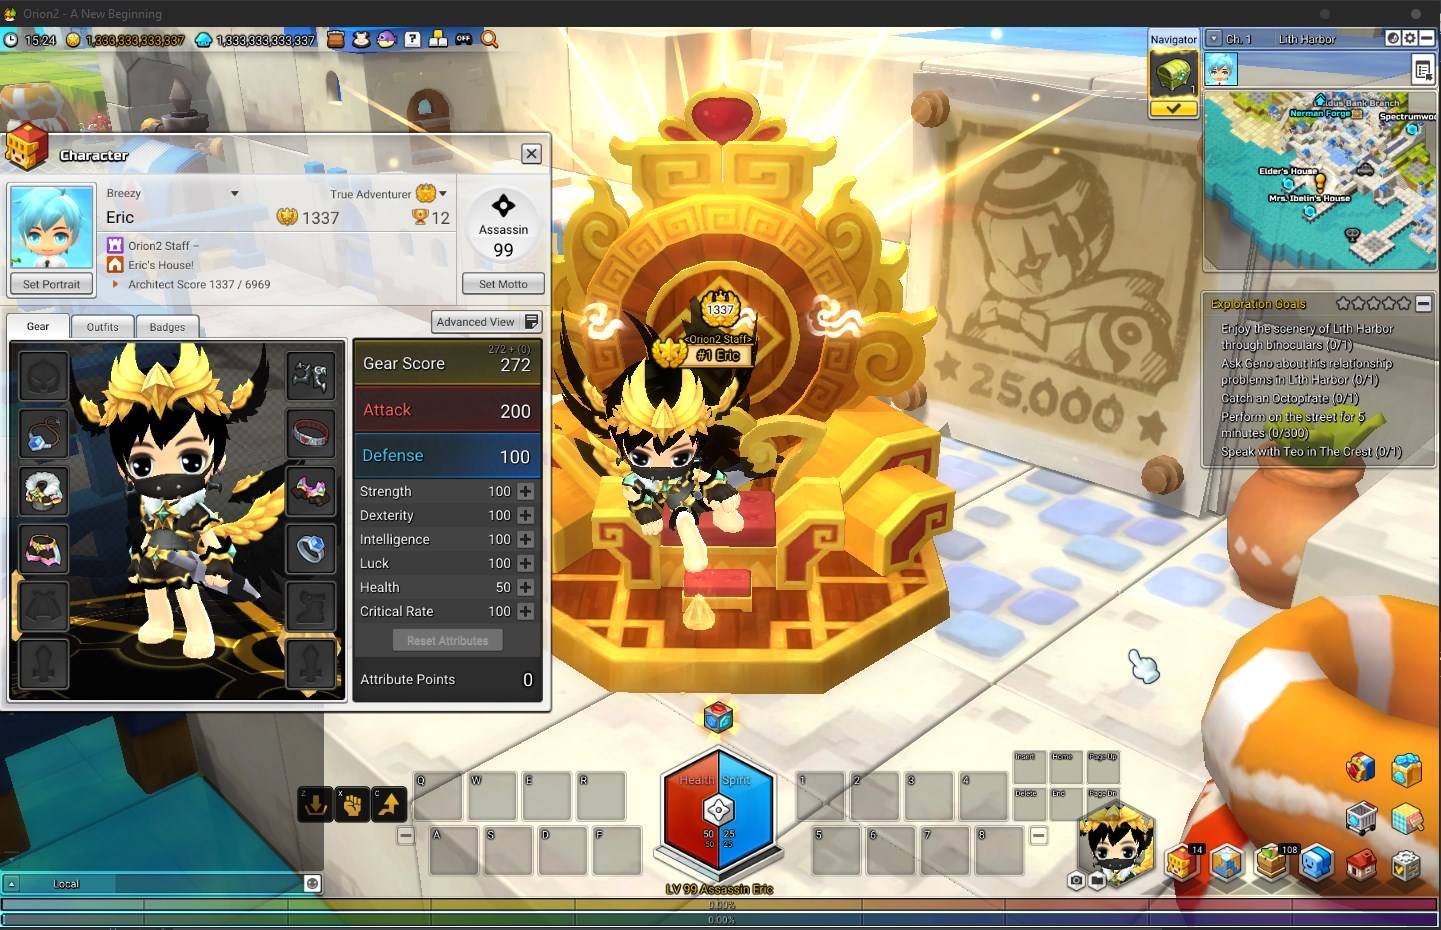 7Y47Iau - Is it possible to have private servers for MapleStory M and MapleStory 2? - RaGEZONE Forums